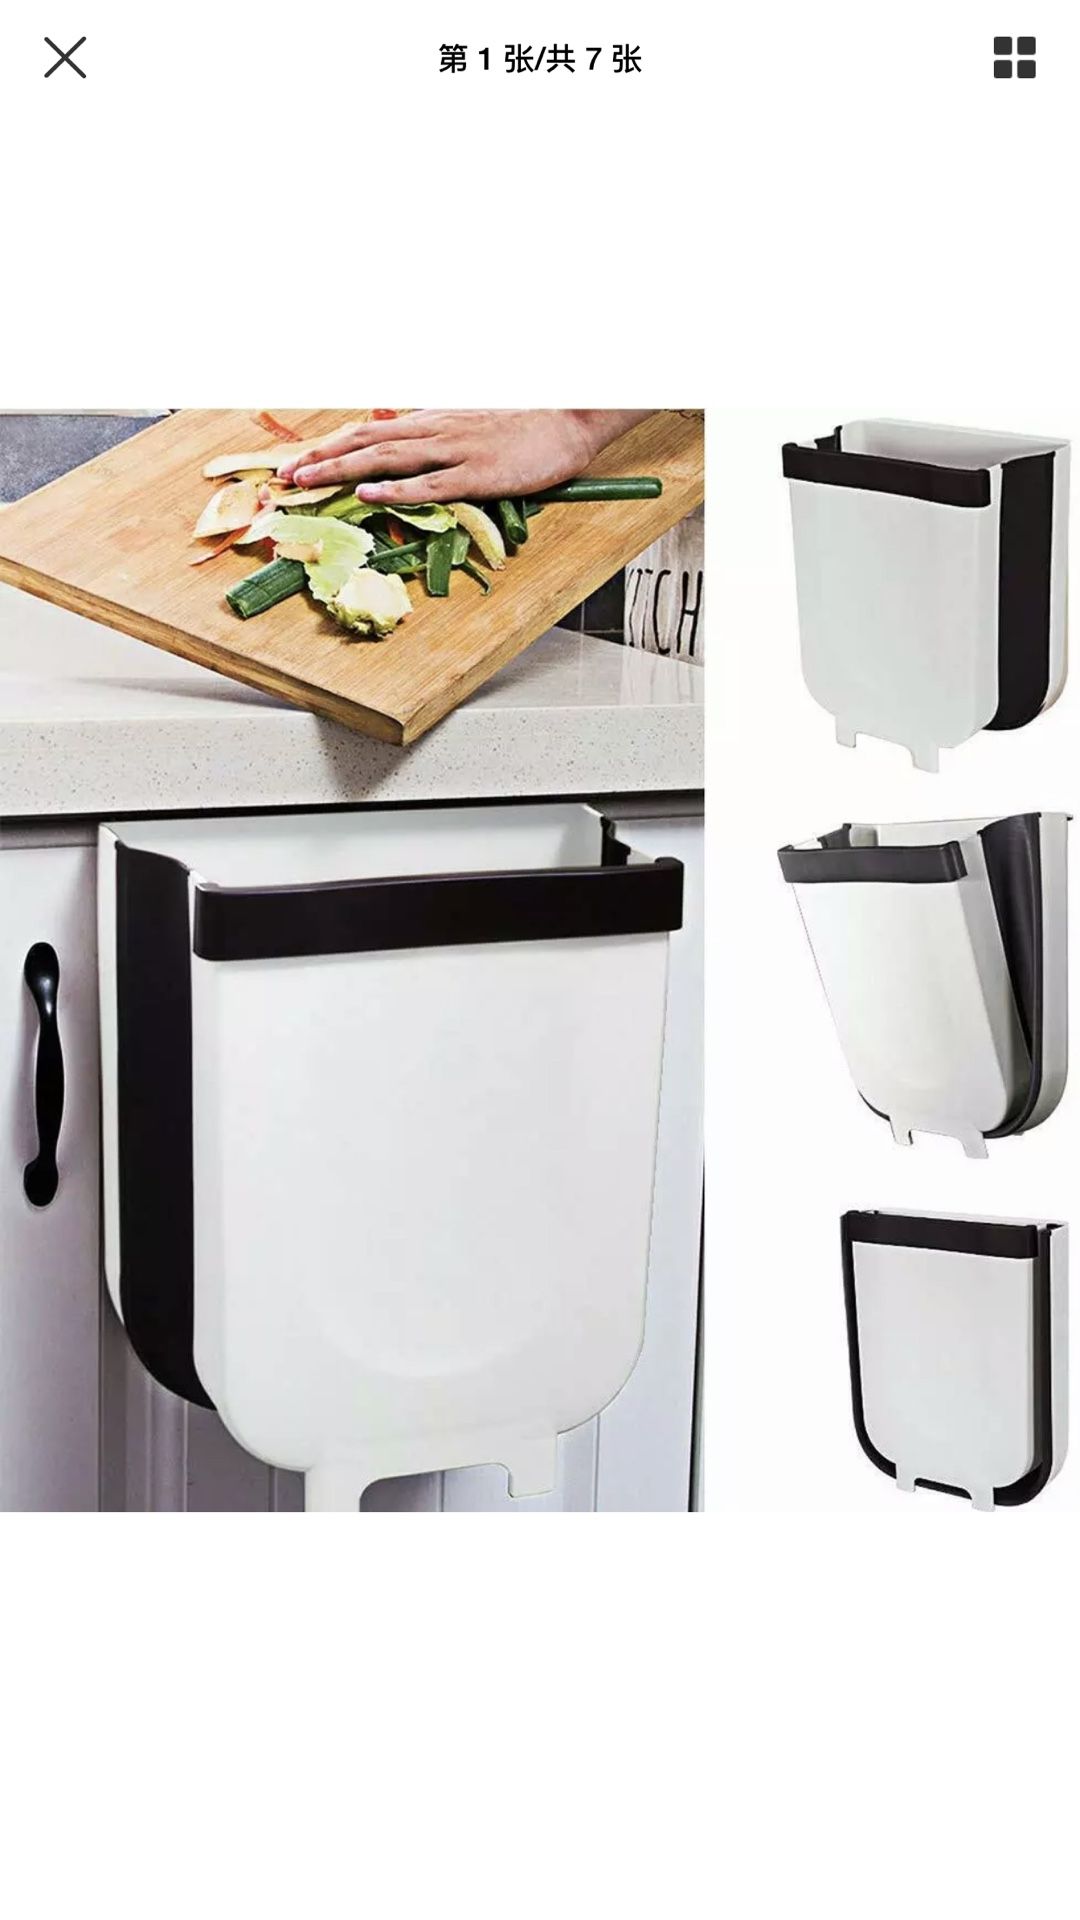 Yibaision Hanging Trash Can for Kitchen Cabinet Door, Kitchen Garbage Can White